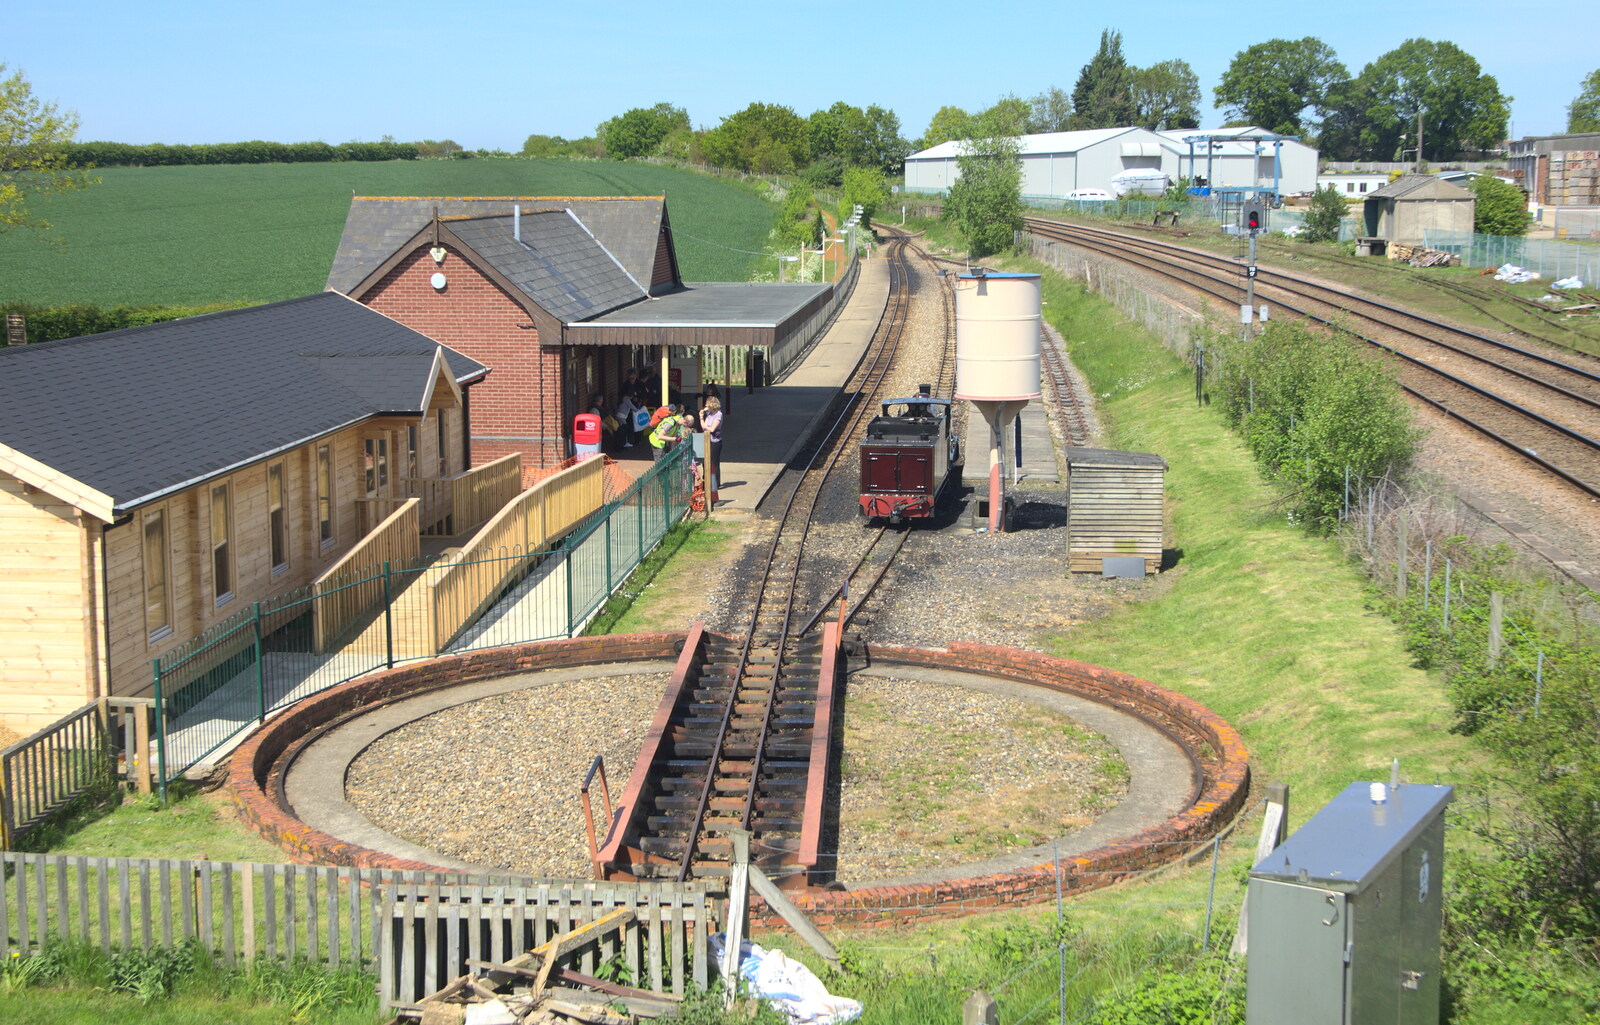 The view from the signal box from The Bure Valley Railway, Aylsham, Norfolk - 26th May 2013